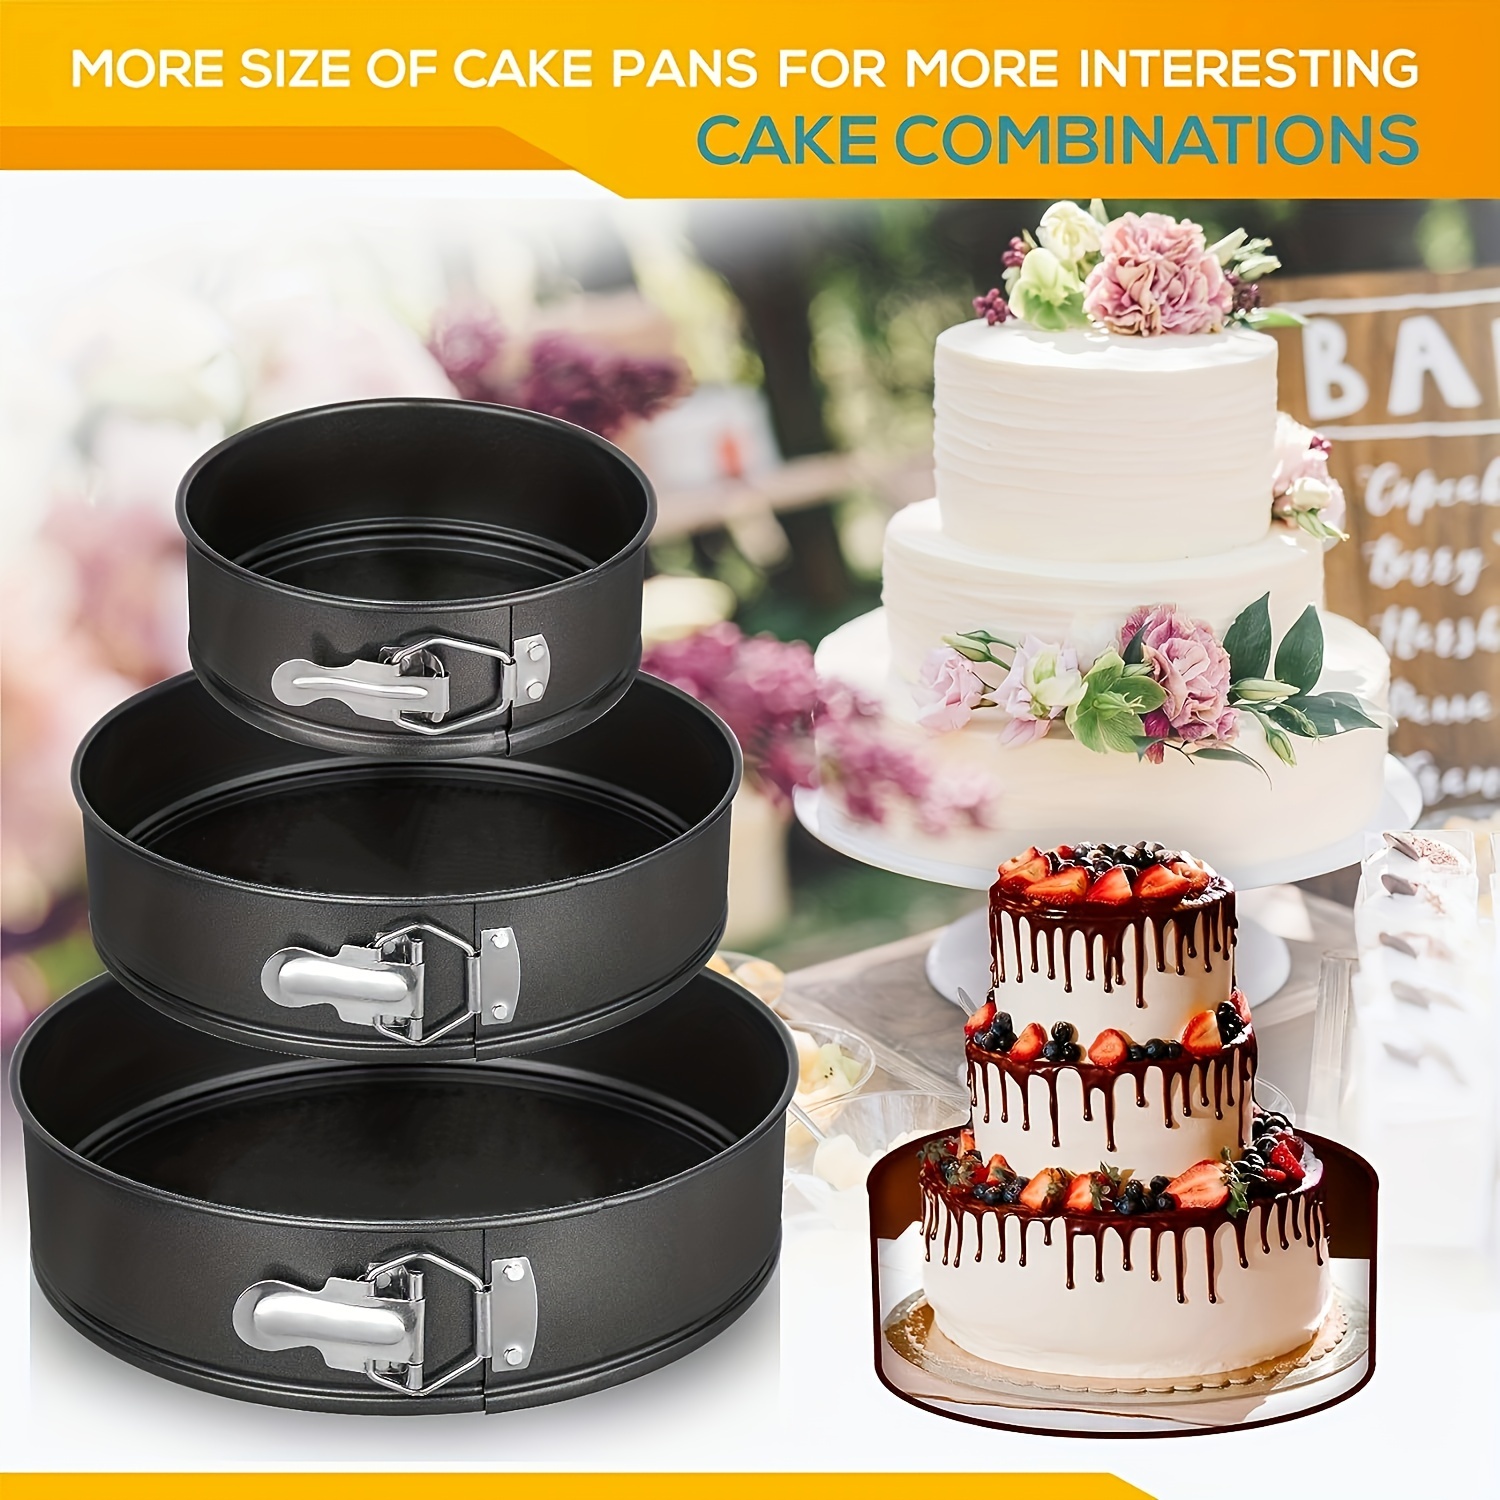 8 inch Round Cake Pan Stainless Steel Baking Pan with Removable Bottom for Birthday Wedding Tier Cake One-Piece Molding Leakproof Easy Clean, Other